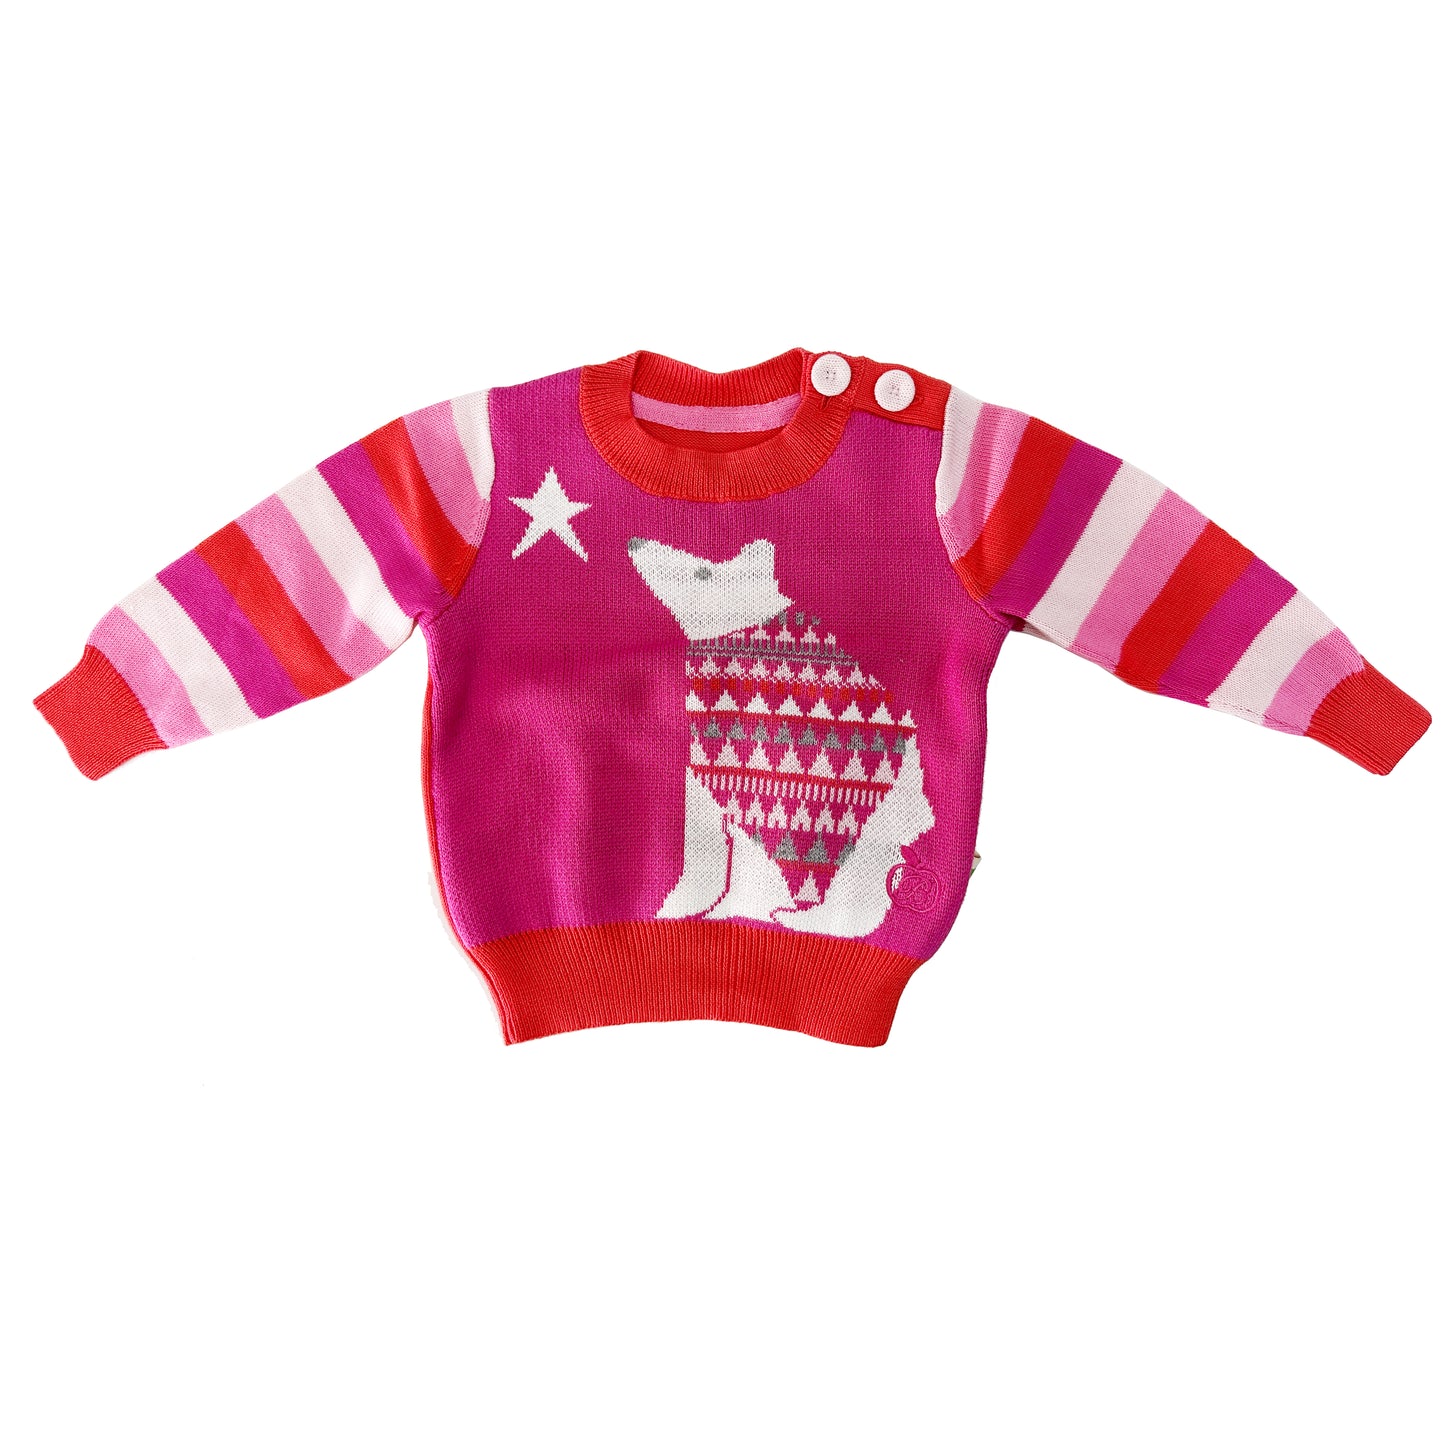 SWEATER - BABY - 2 COLOR (GREY/PINK) - BBA14